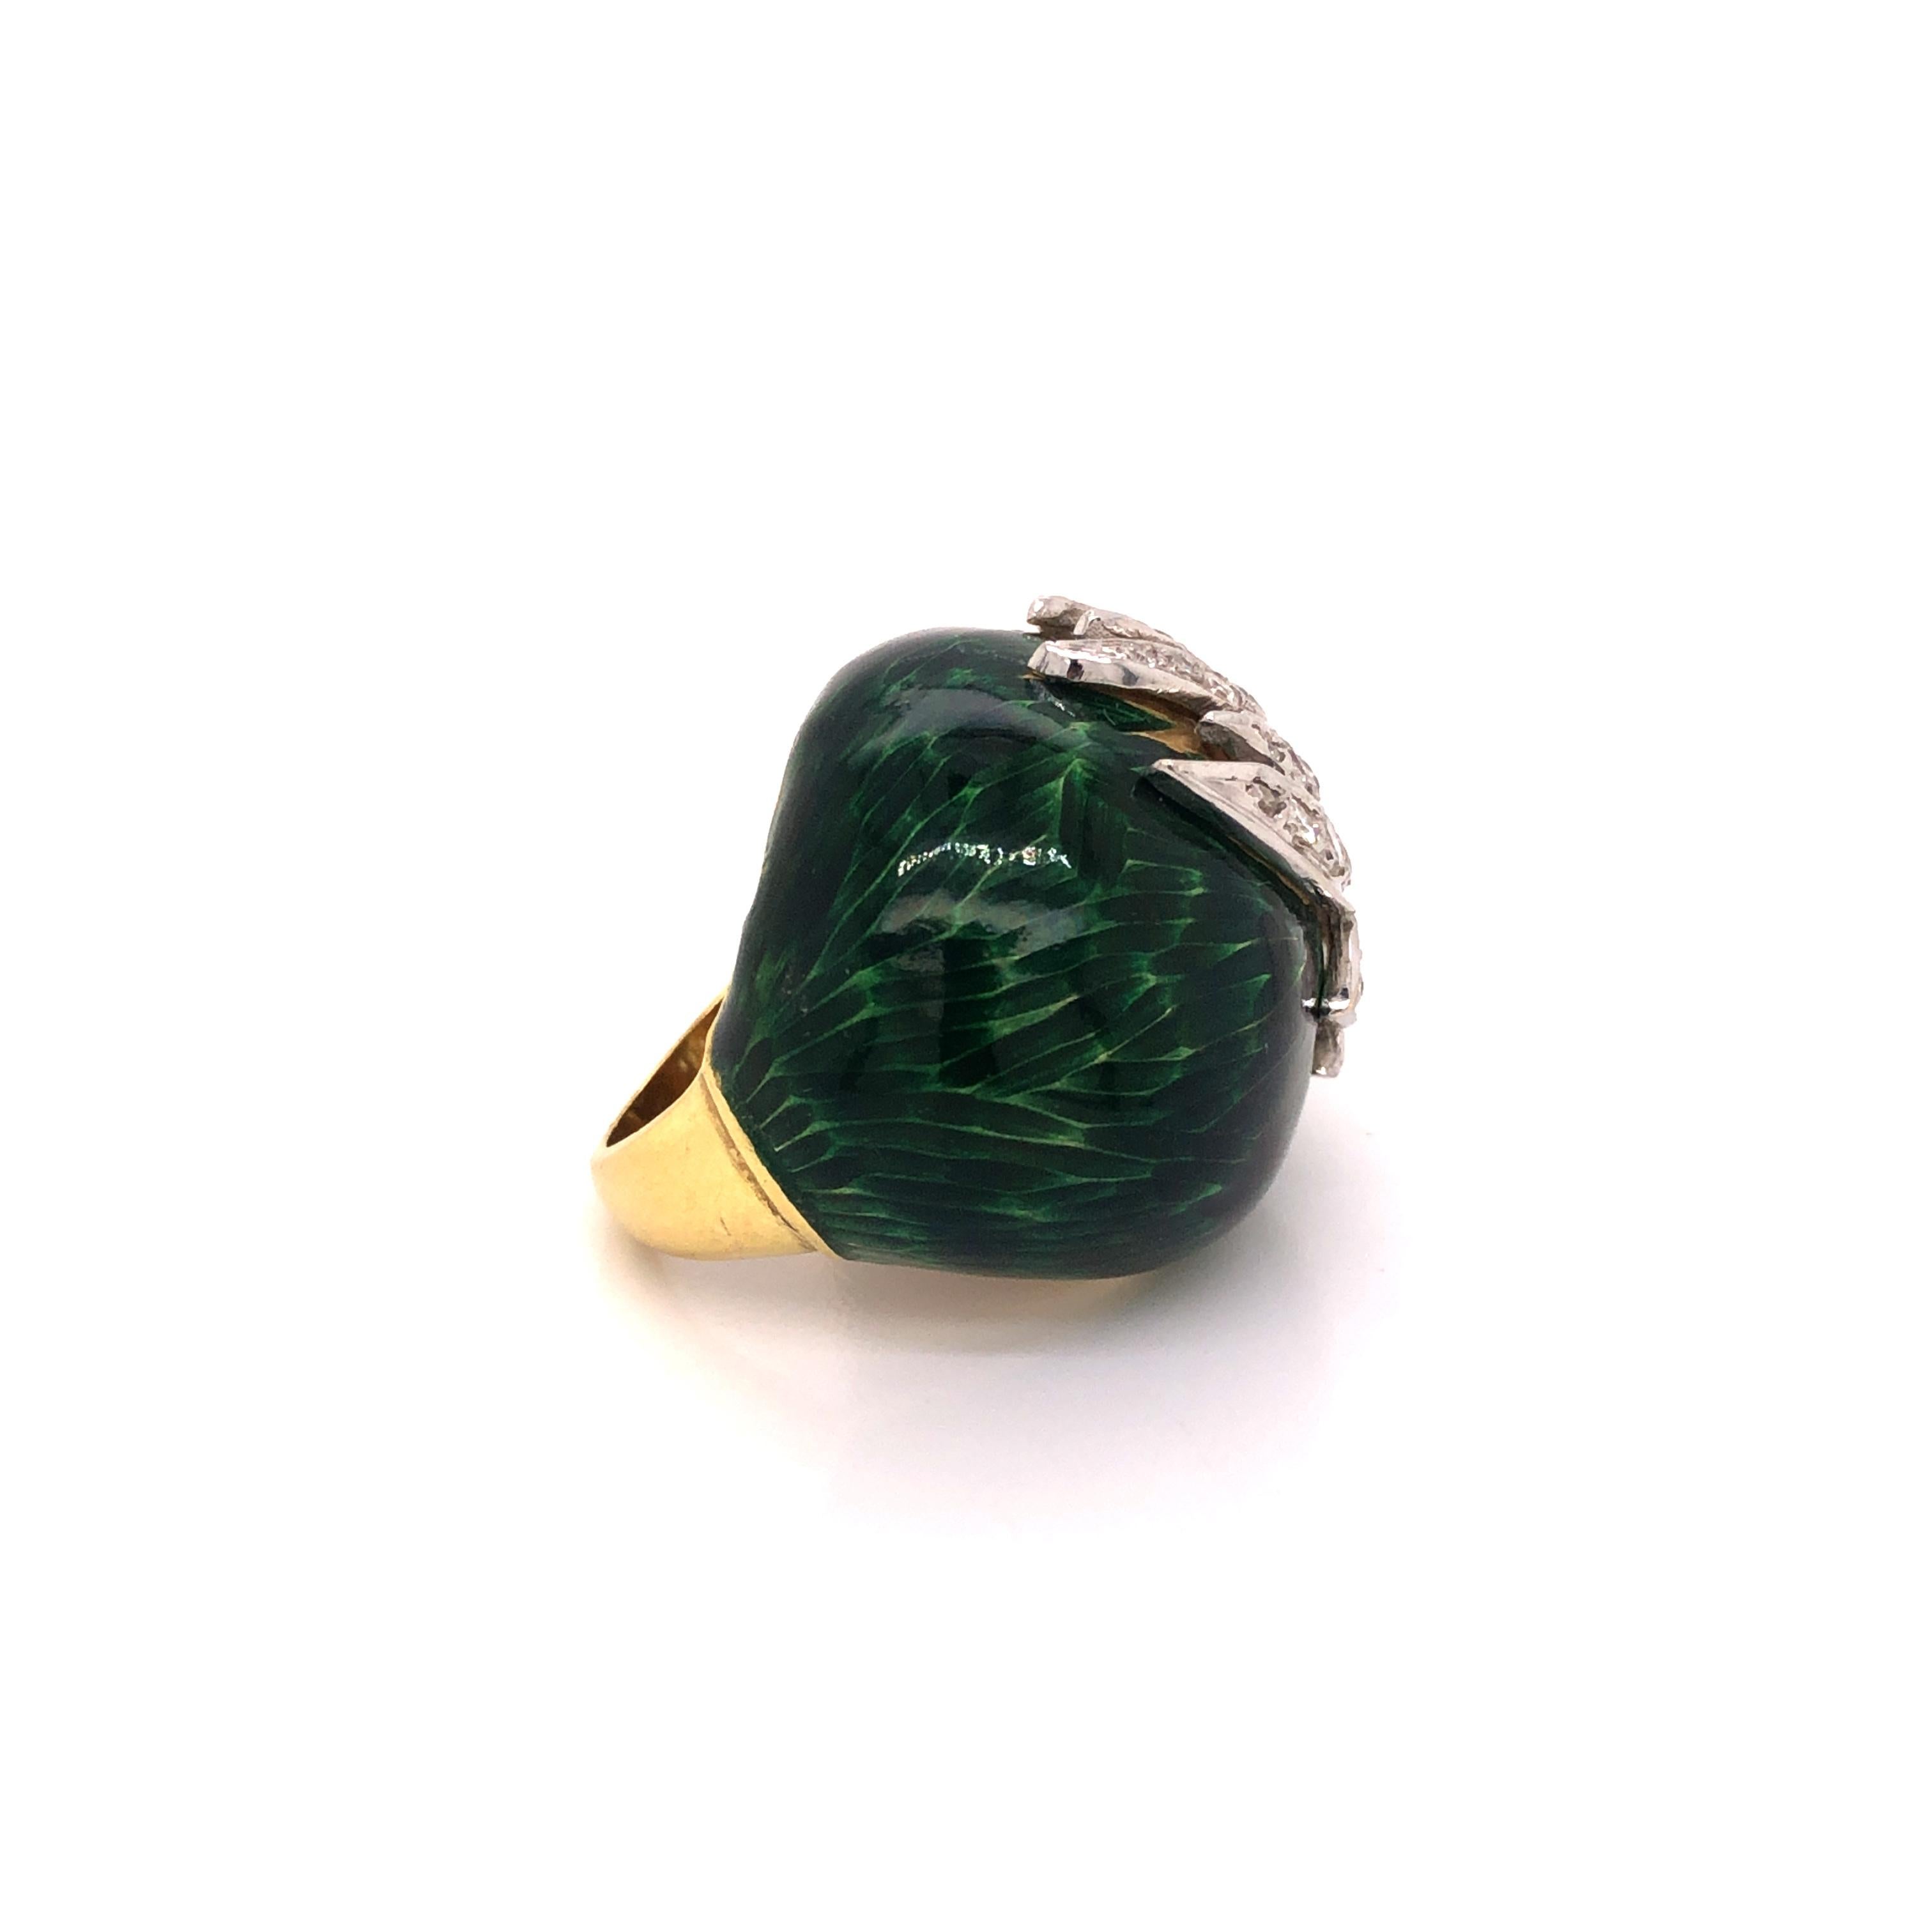 A stunning vintage cocktail ring featuring full-cut diamonds weighing a total of approximately 0.90 carat, set in 18k white gold, enhanced by green enamel finish.

Ring size 6.5
